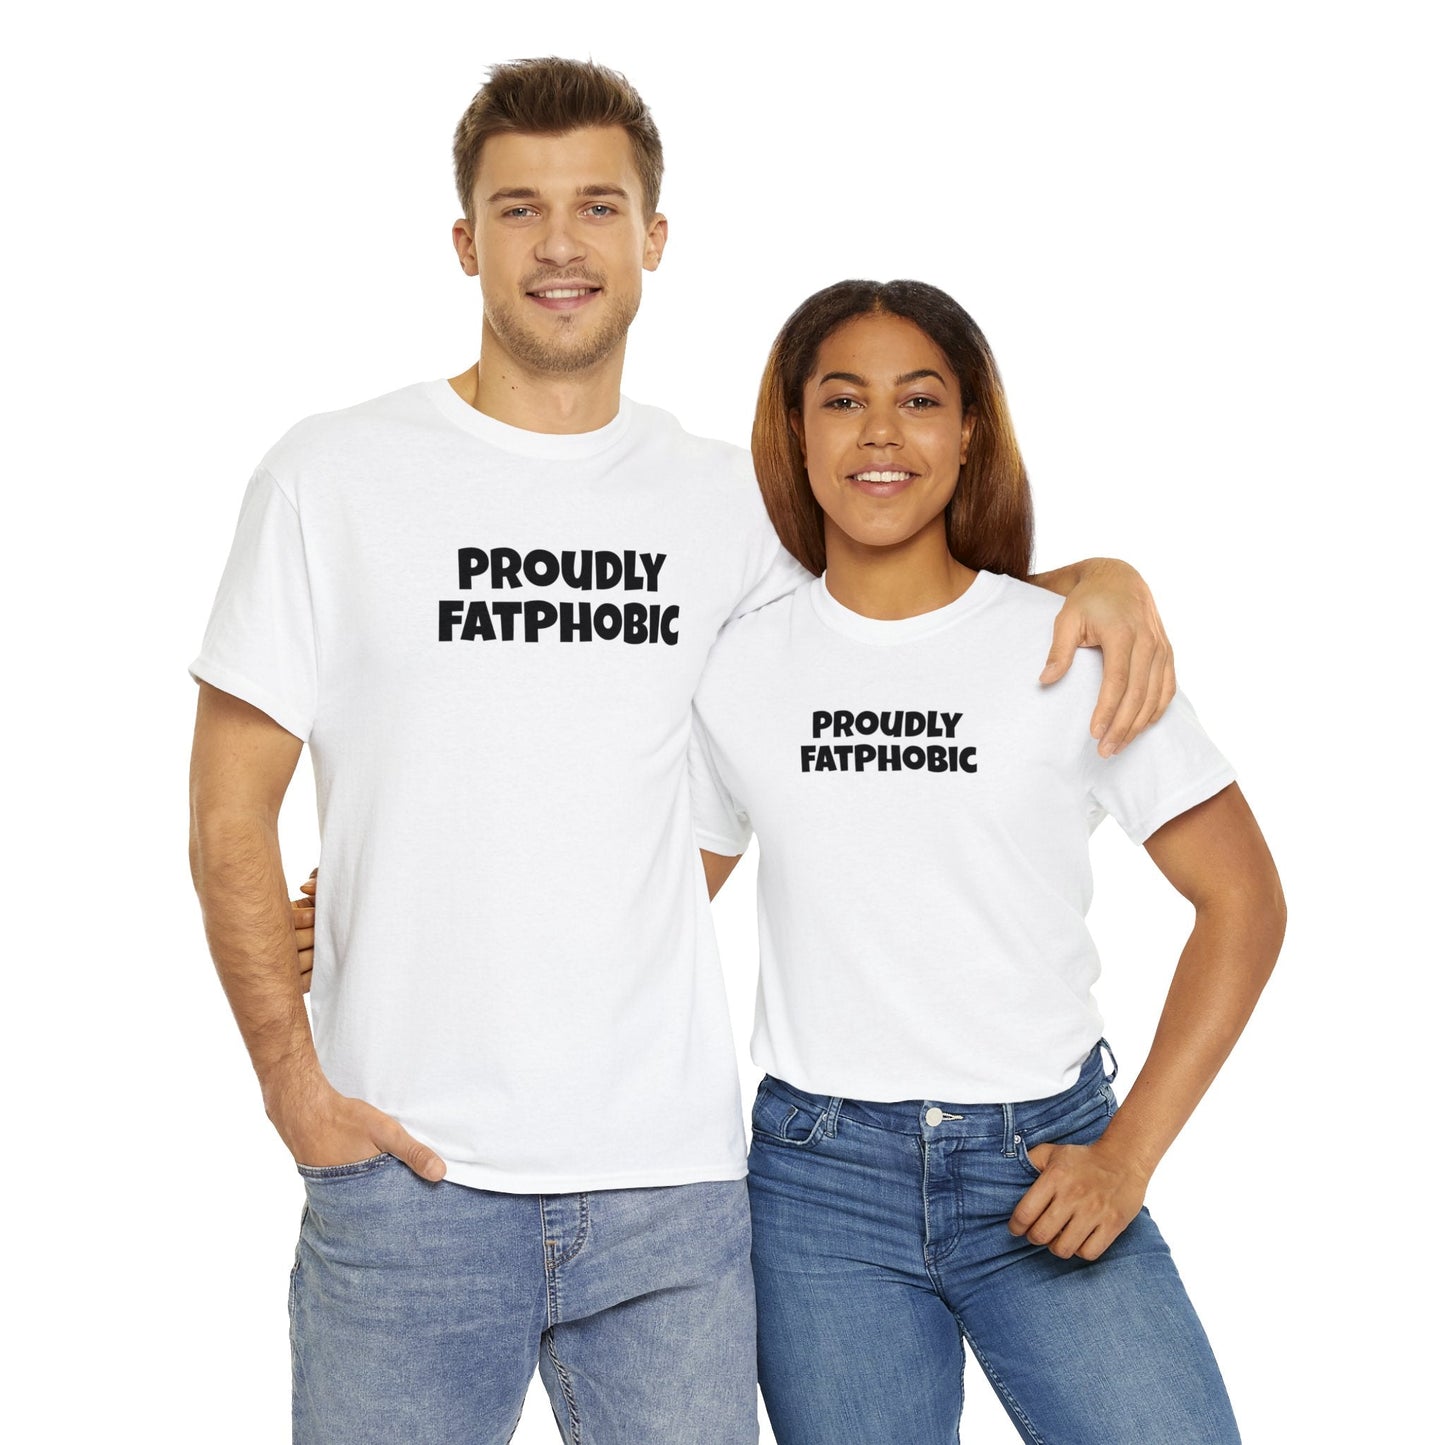 Proudly FatPhobic Tee